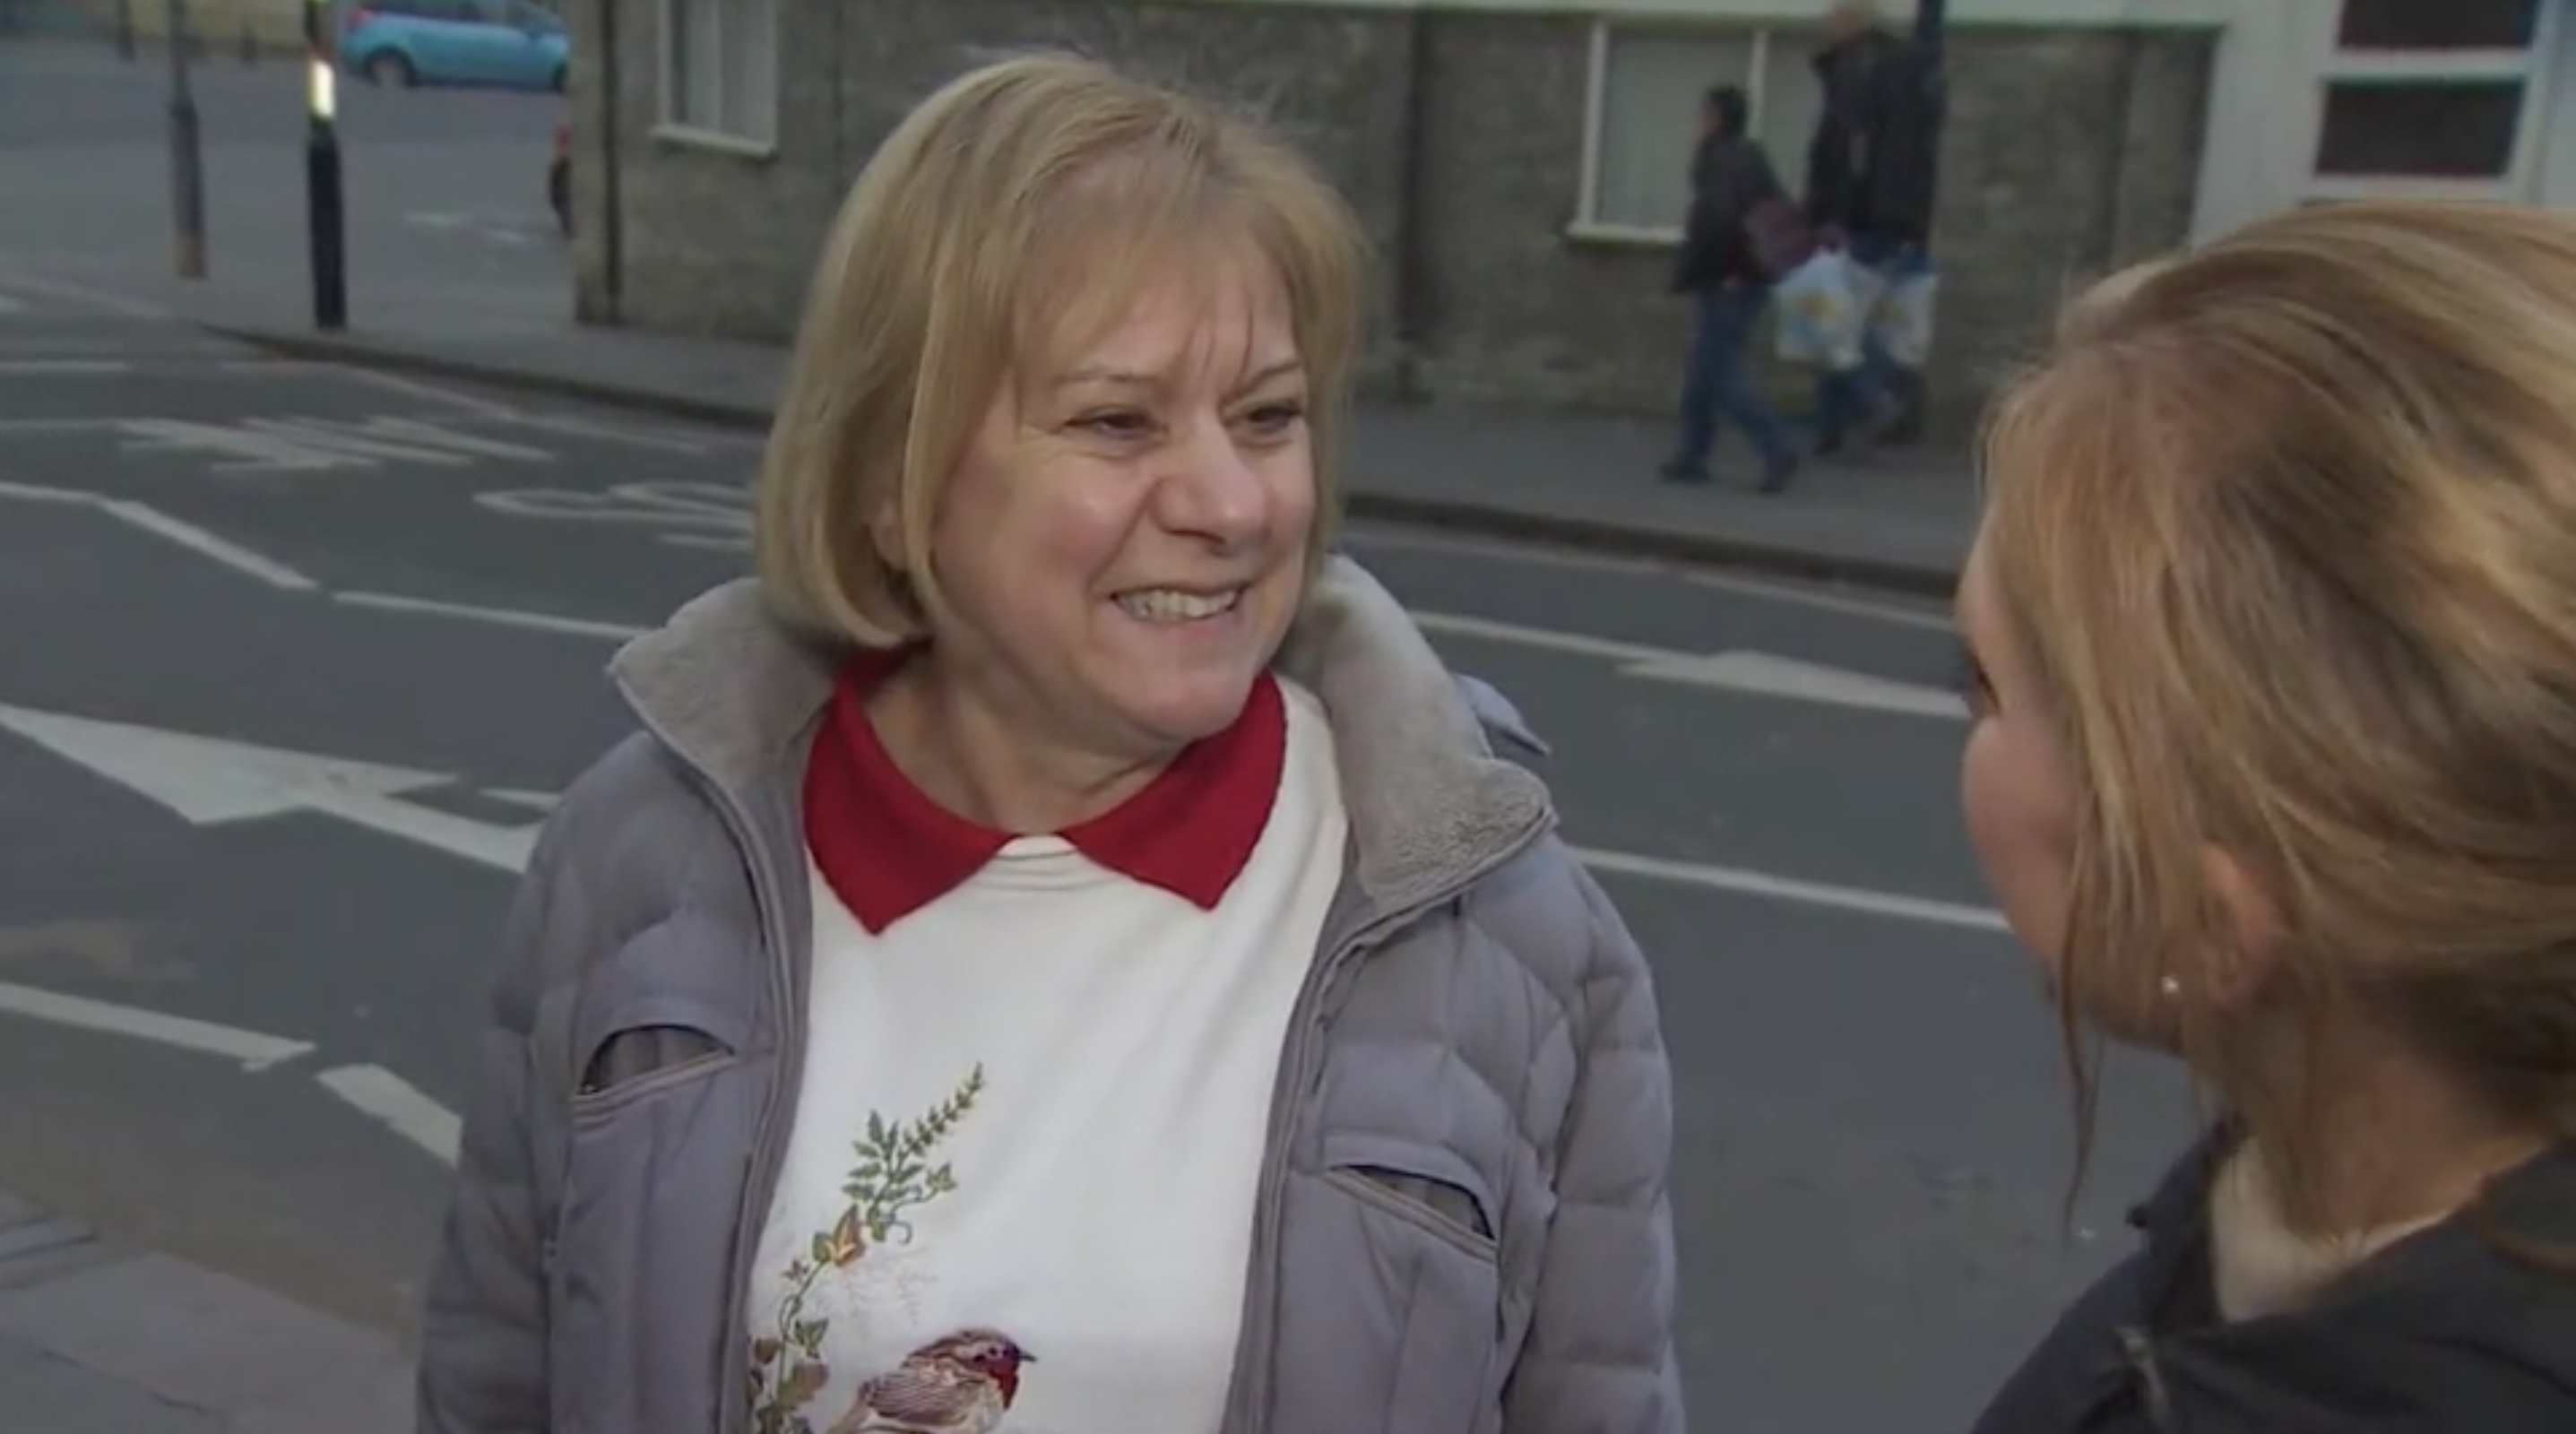 65-year-old Julia Howson says she wasn't sure if the Brexit "mess" was created by Theresa May, or simply the situation of leaving the EU.